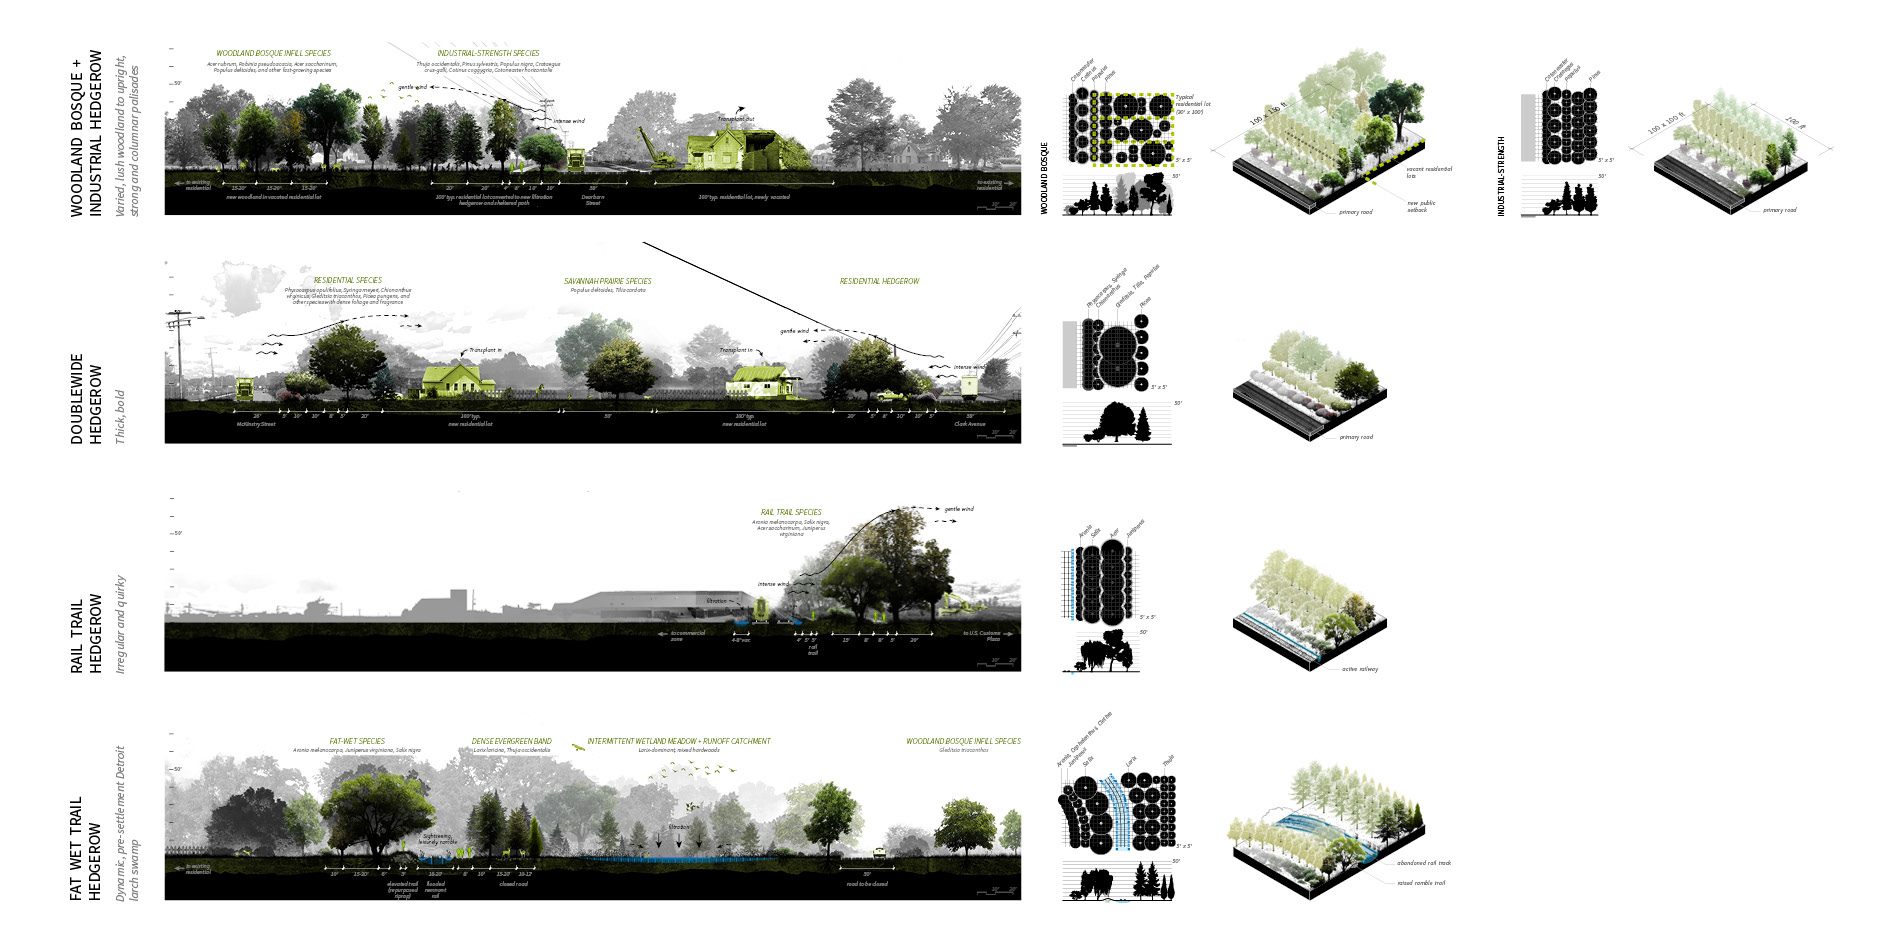 Landscape typologies of new green infrastructure